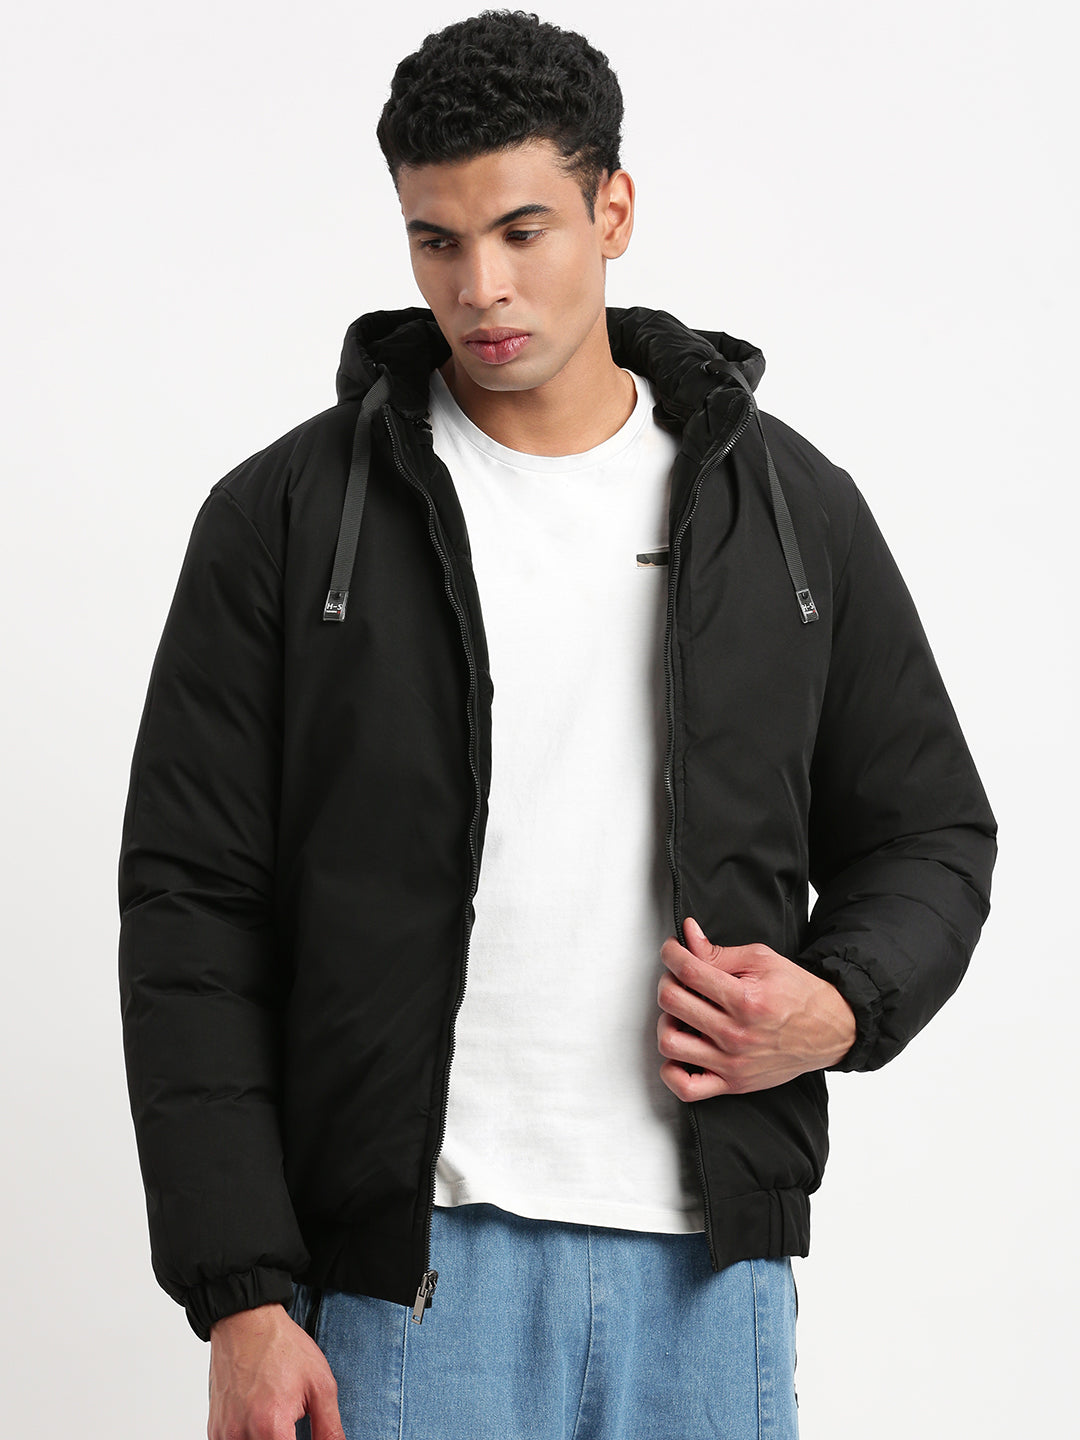 Men Mock Collar Black Solid Reversible Puffer Jacket comes with Detachable Hoodie